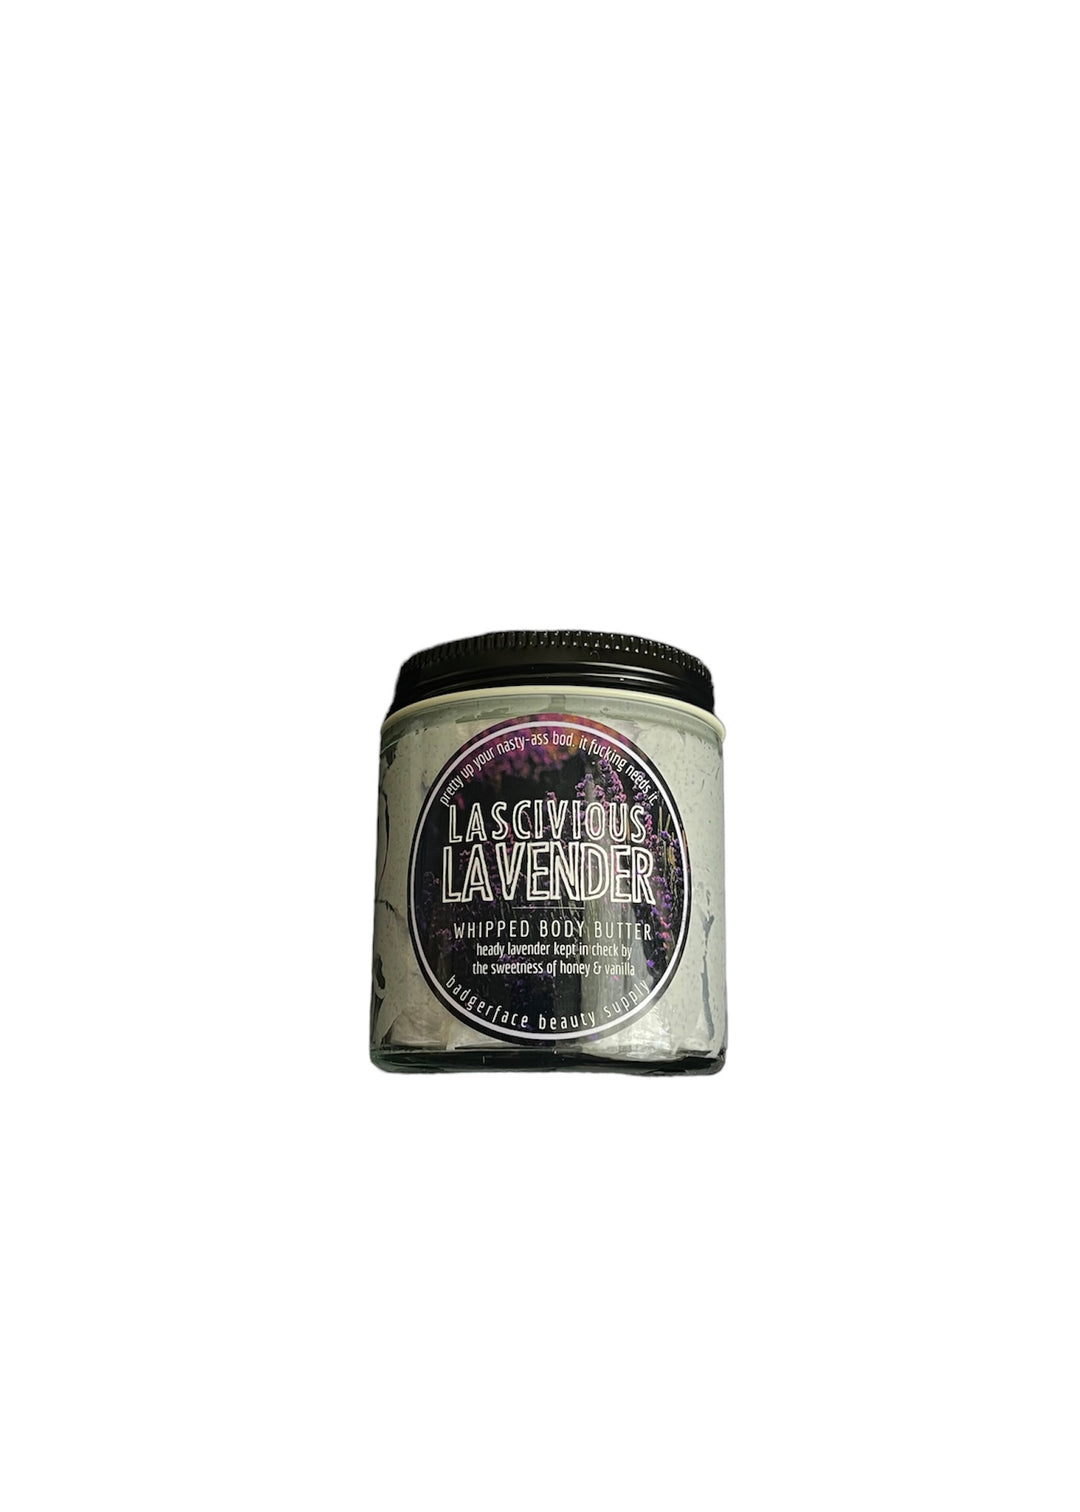 LASCIVIOUS LAVENDER WHIPPED BODY BUTTER